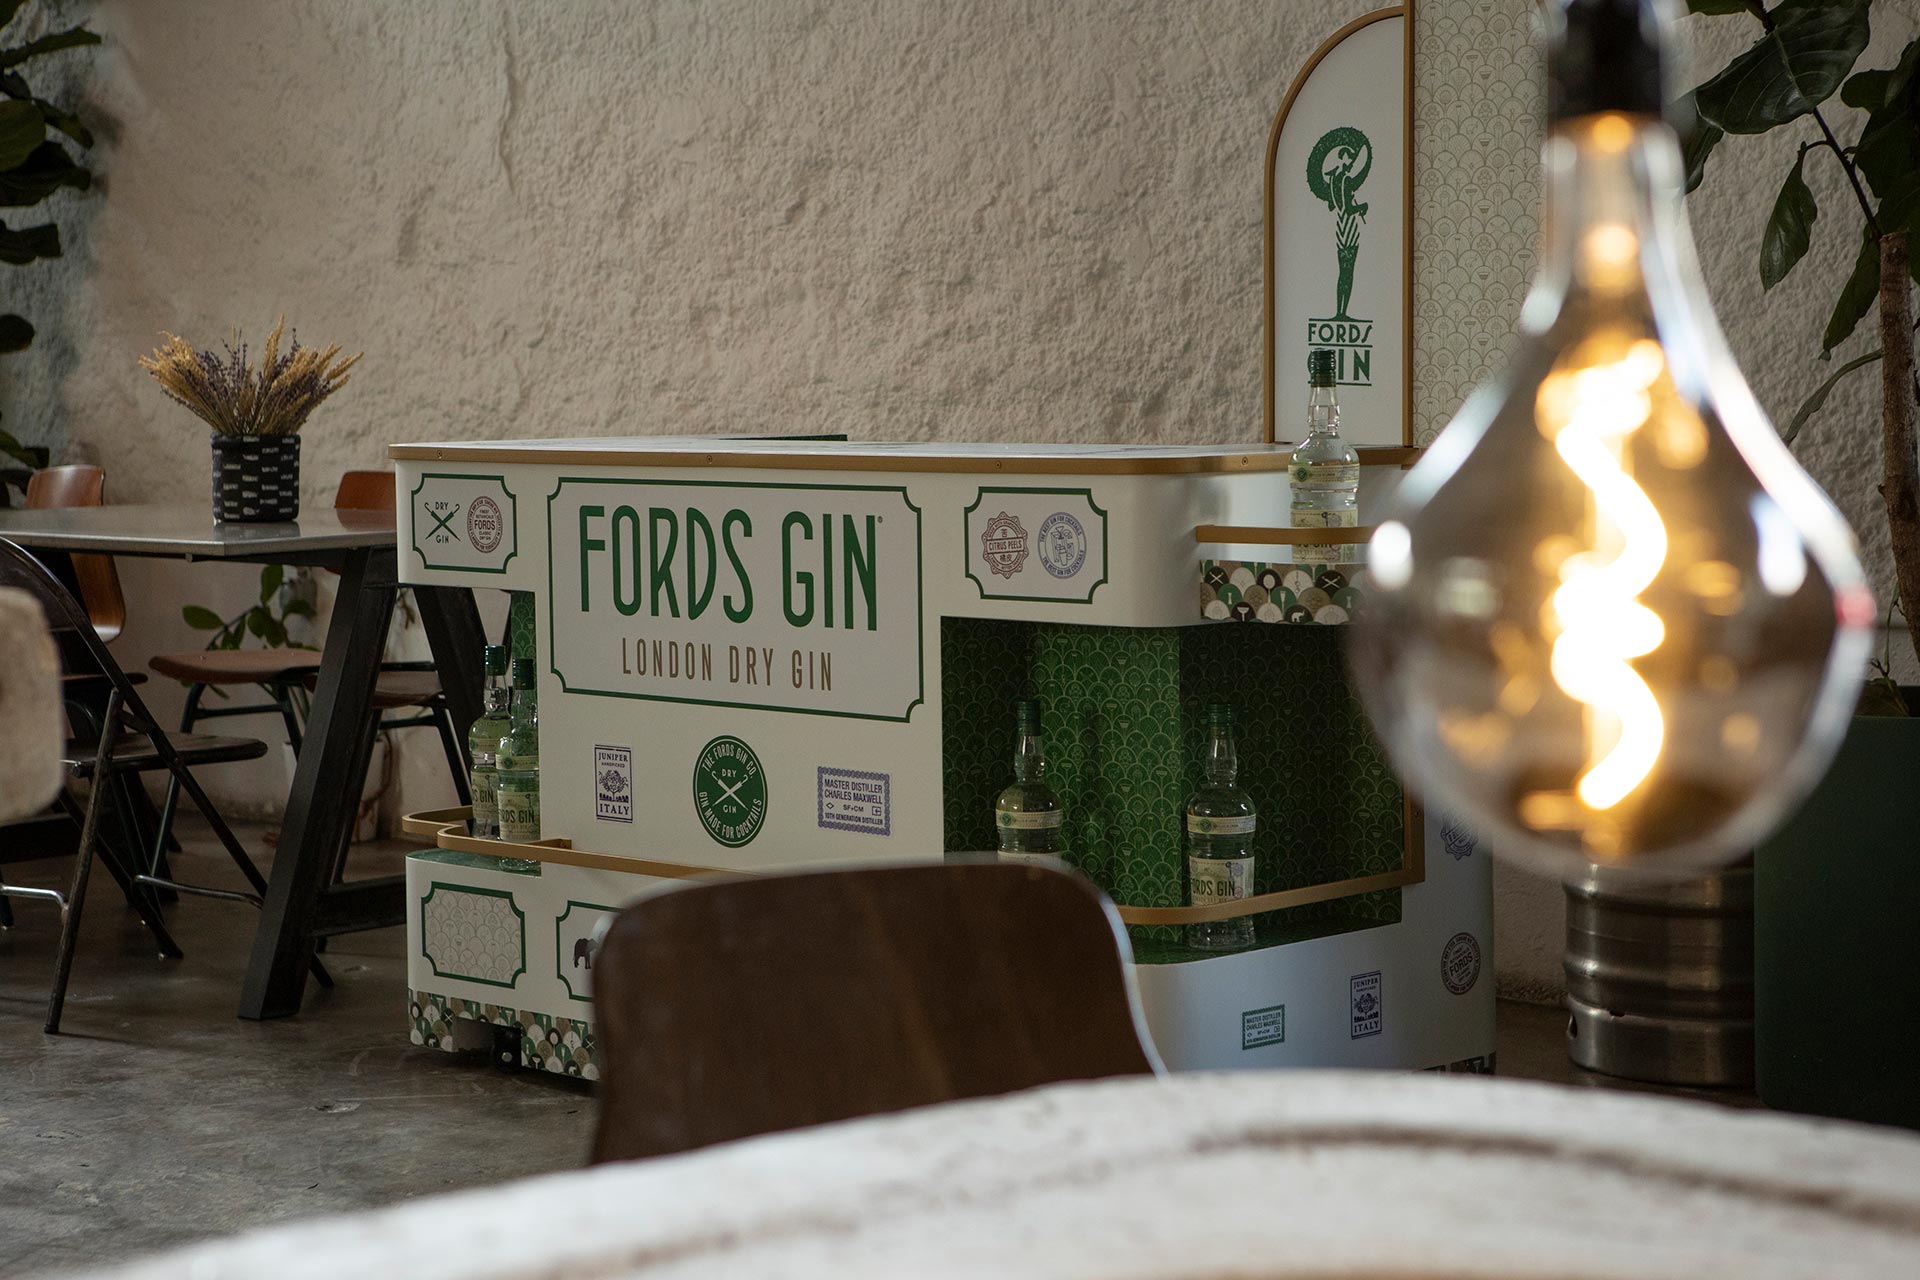 Fords Gin Cocktails